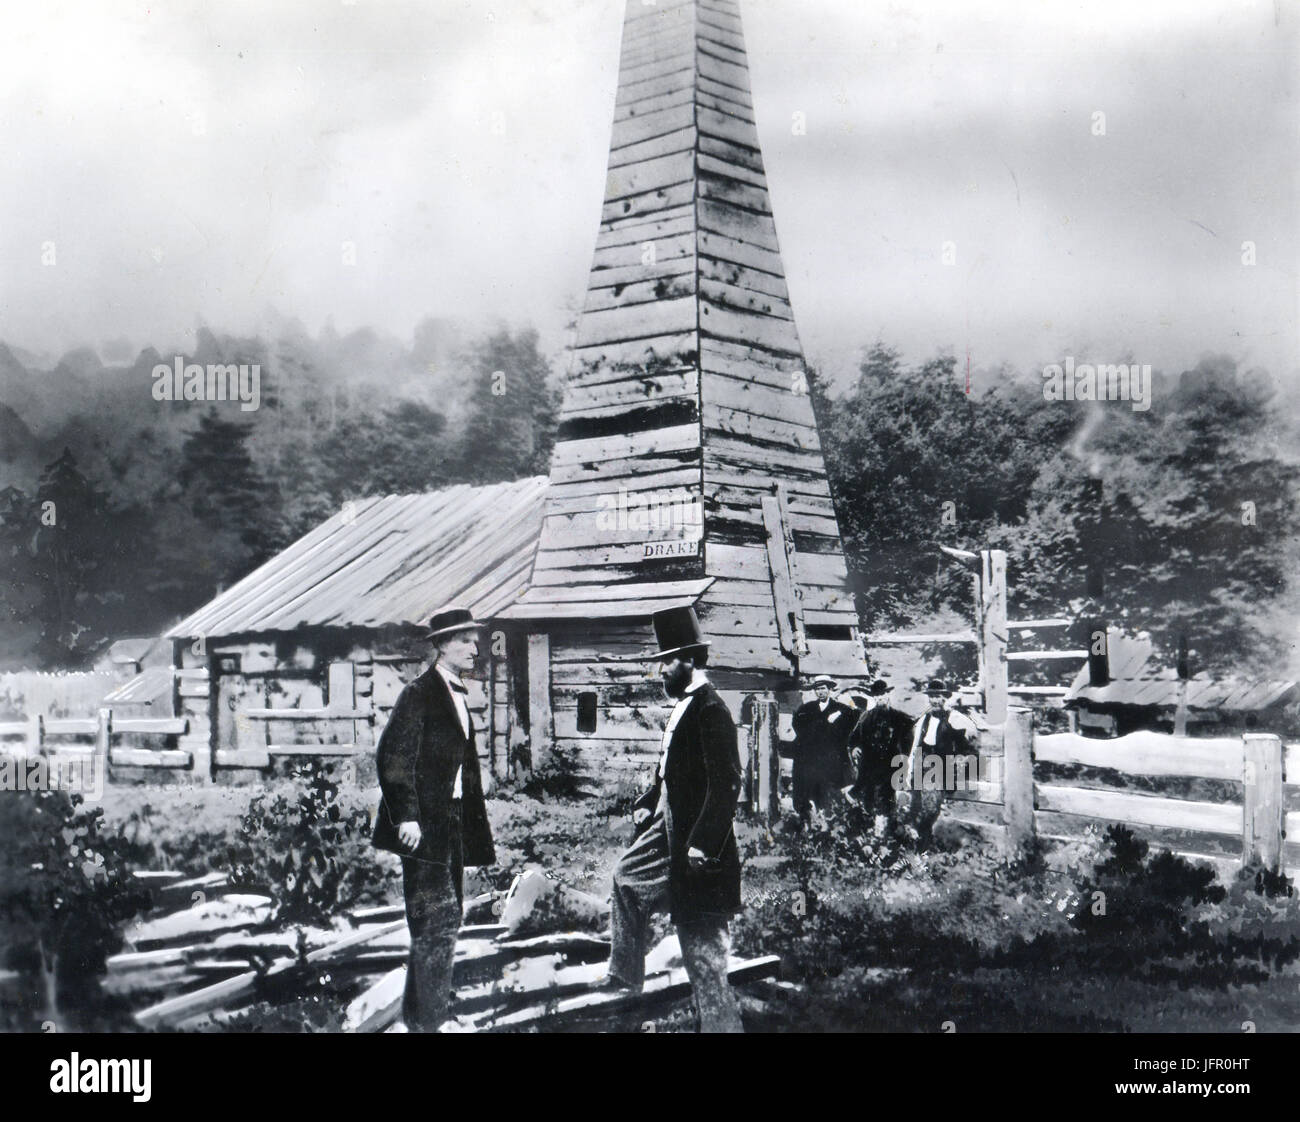 The original Drake oil well. Col. Drake in the right foreground. This was the first oil well in the US which began operating in 1859. Titusville, PA, 1861 Stock Photo